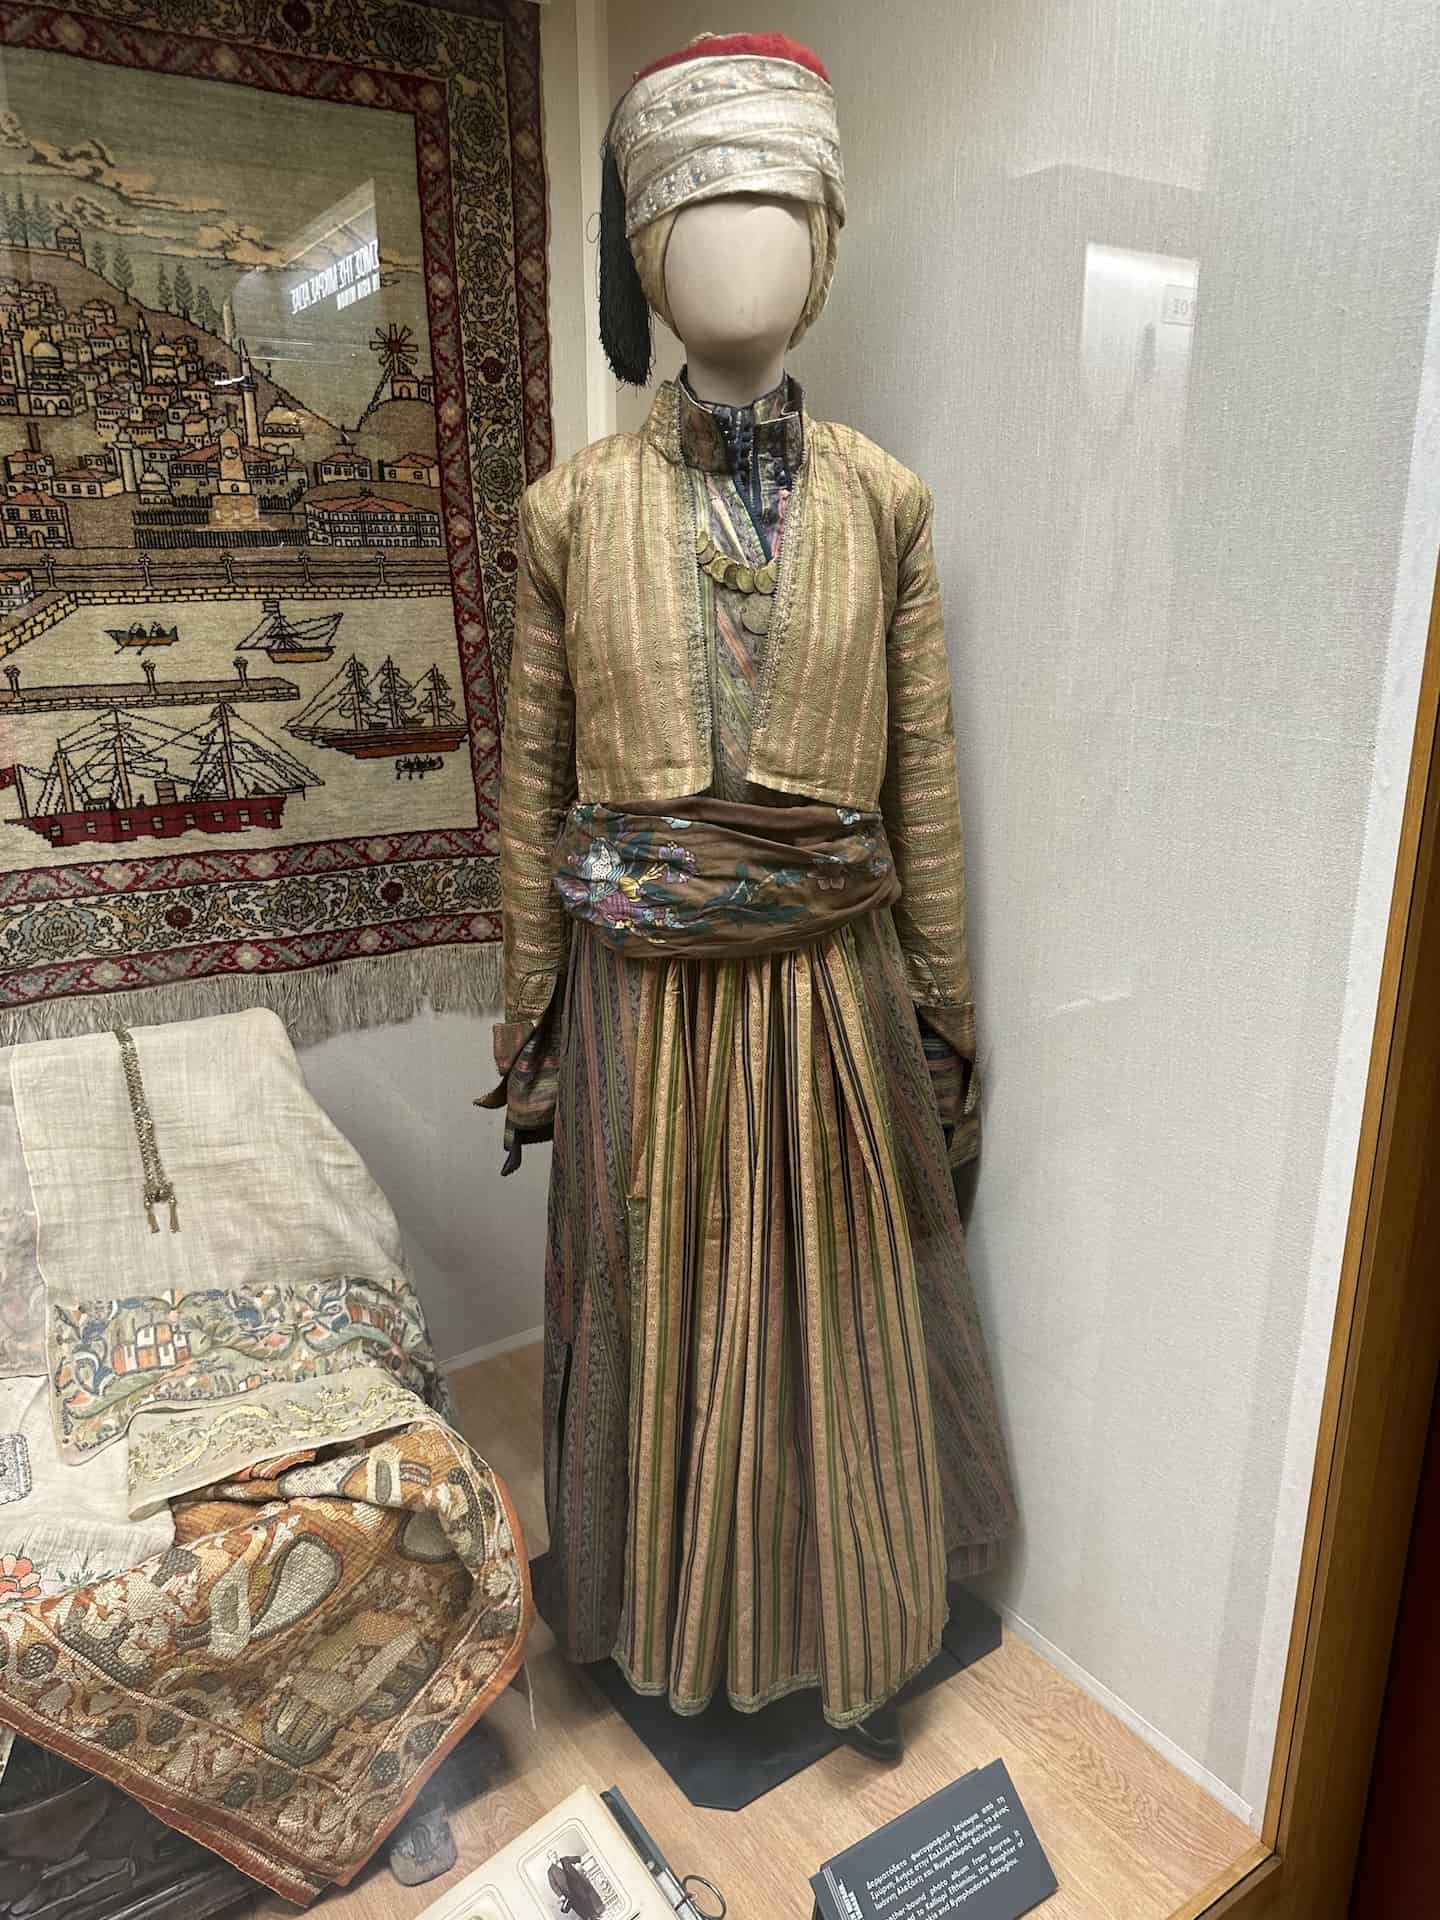 19th century festive costume from Iconium (Konya) in From Greater...to Contemporary Greece (Part 1) at the National Historical Museum in Athens, Greece